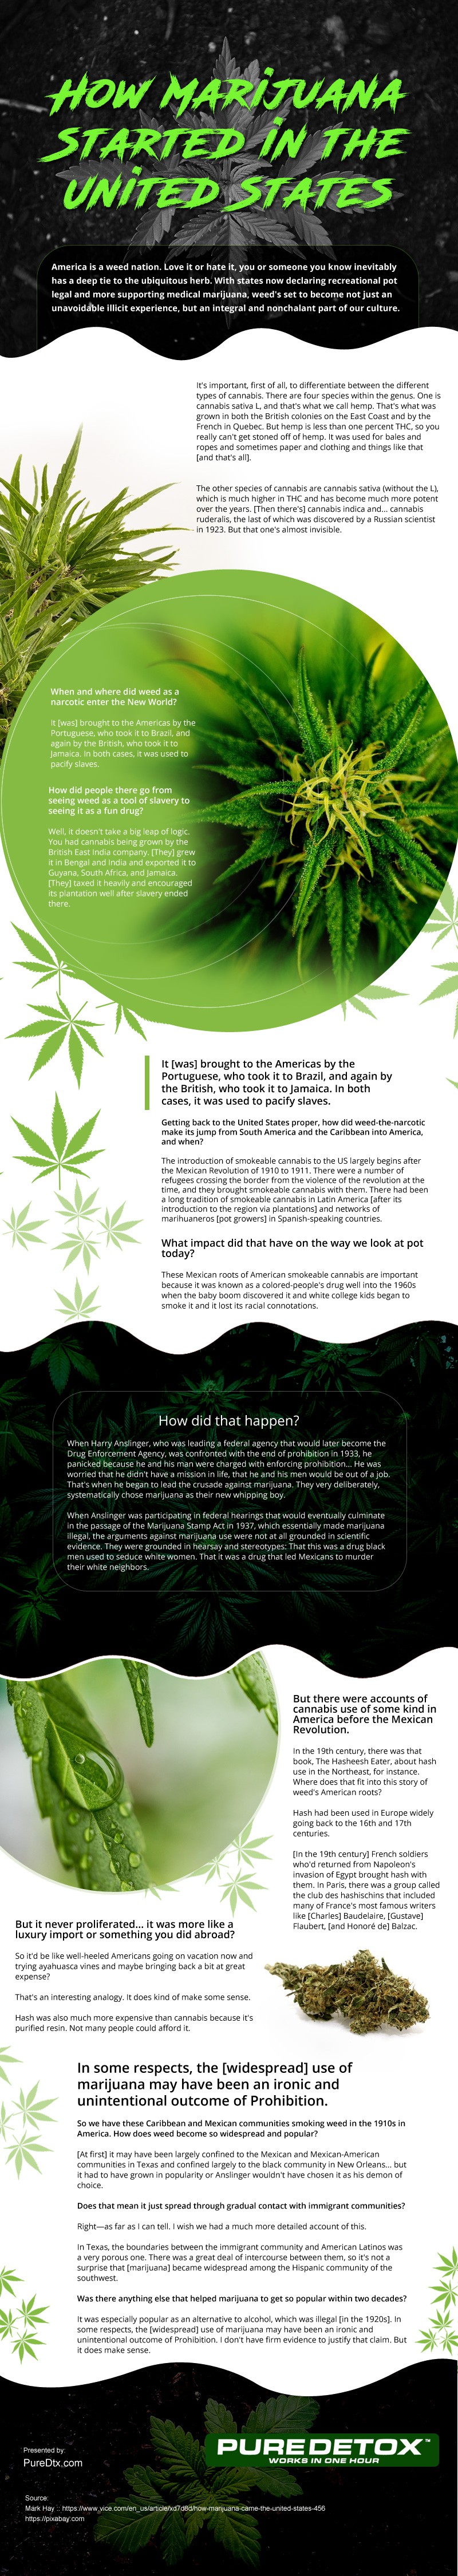 How Marijuana Started in the United States [infographic]